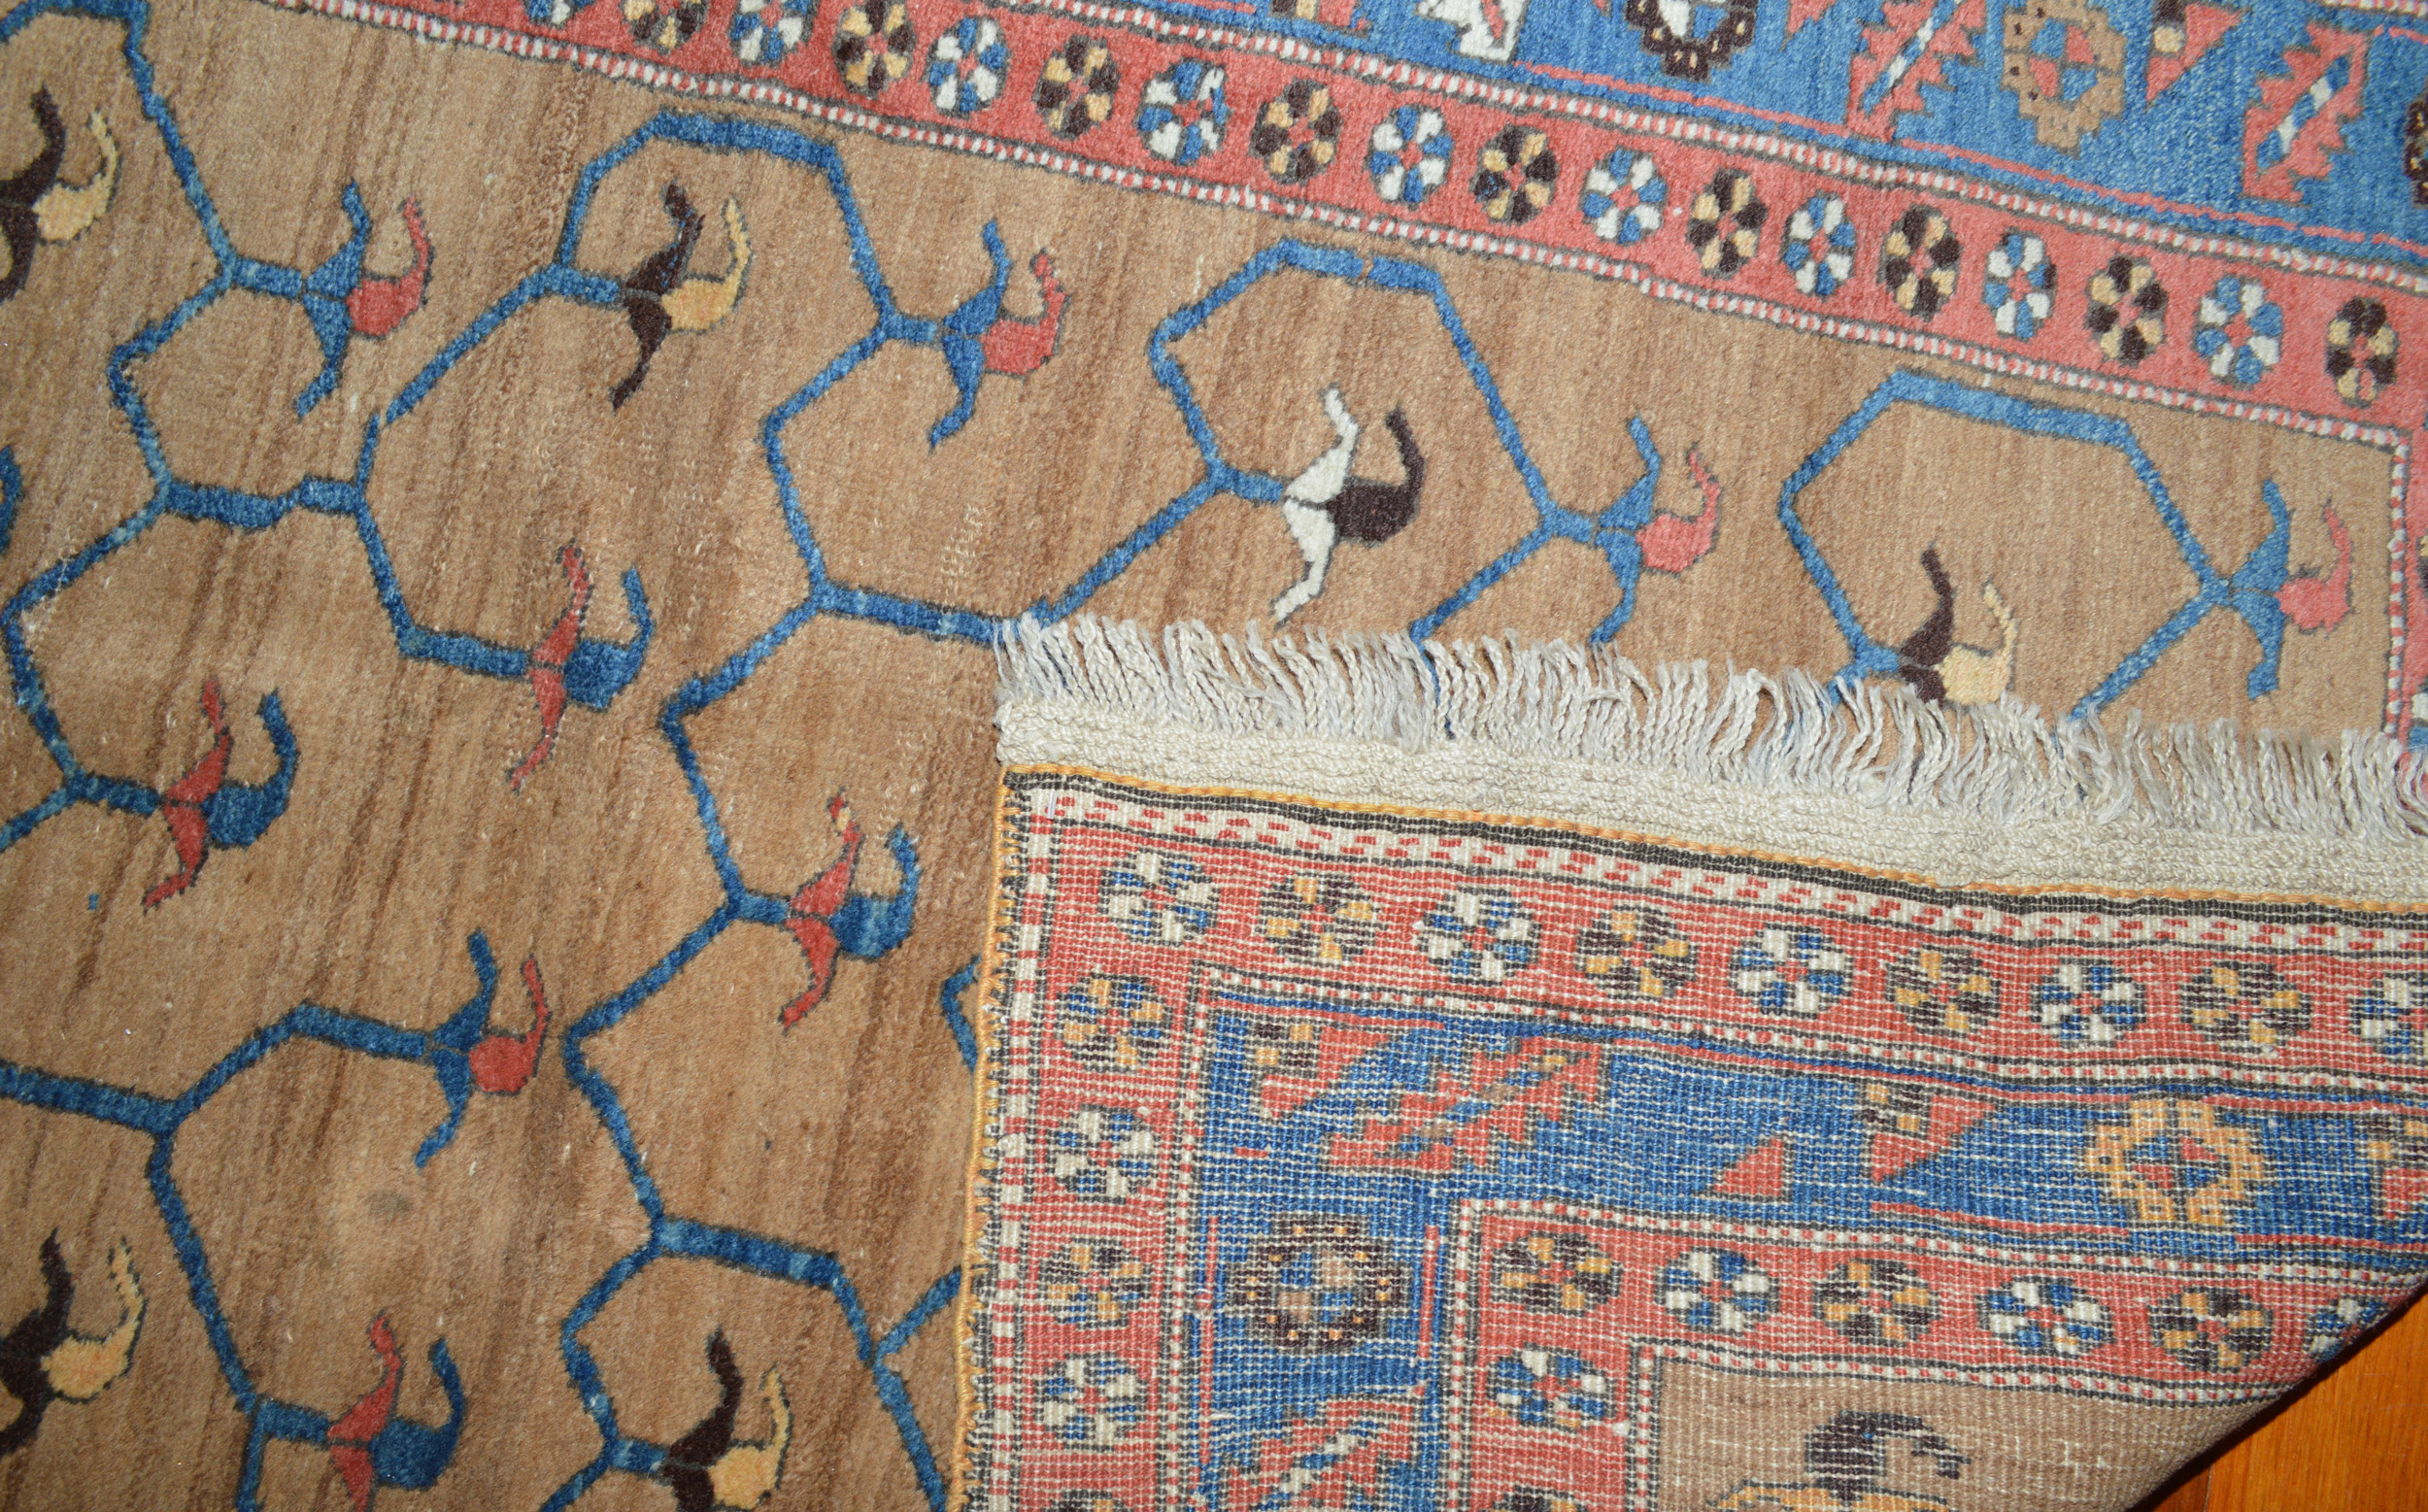 Weave detail from an antique northwest Persian Bakshaish runner rug. Sky blue vines with small flowers decorate the camel color field which is framed by a sky blue Leaf and Tower border with coral guard borders, circa 1900. Douglas Stock Gallery, antique Oriental rugs Brookline, Newton, Wellesley, Weston, South Natick,MA area, antique rugs New York by appointment, antique rugs New England, antique rugs Los Angeles